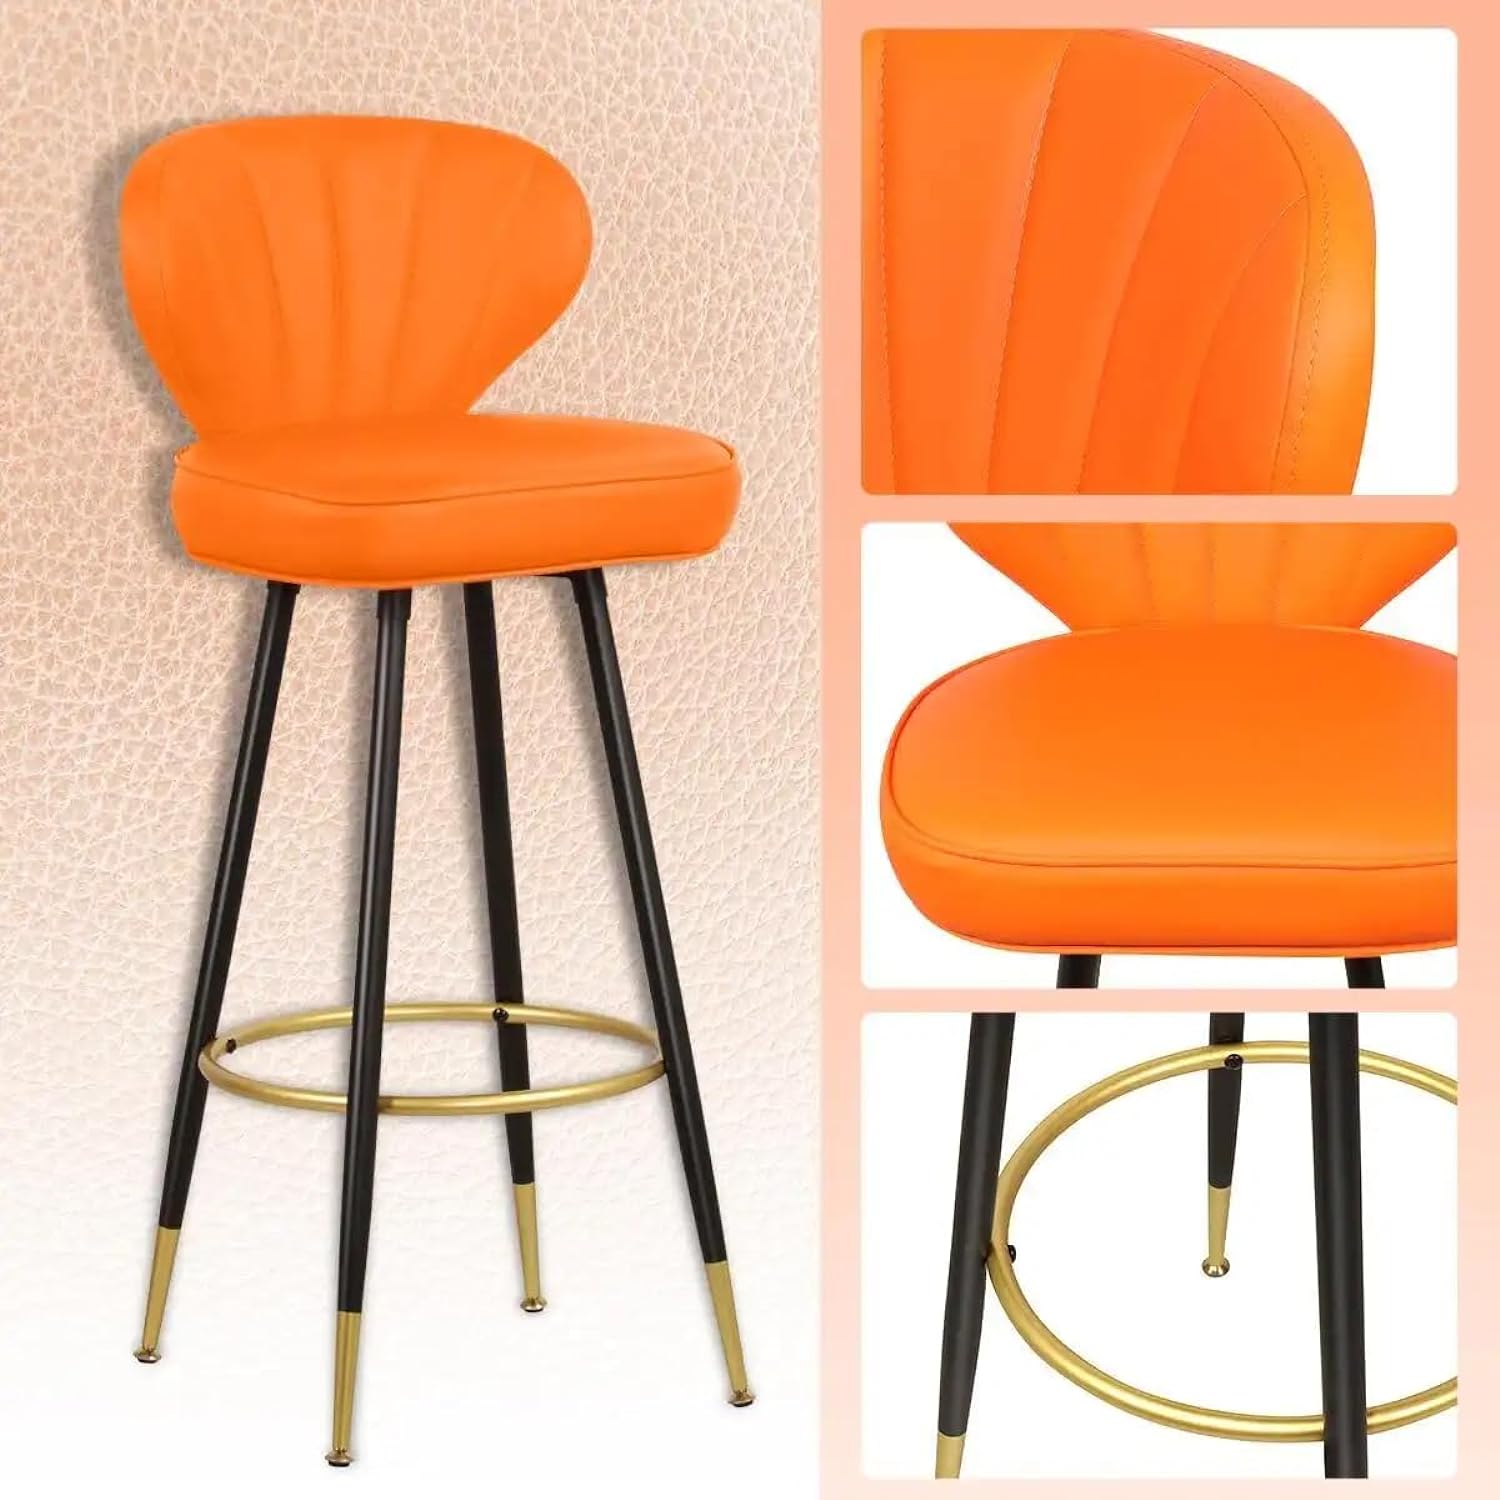 thinkstar Stylish Set Of 2 Modern Barstools, 30 Inch Orange Counter Height Chairs With Gold Footrest, Upholstered In Pu Leather For …